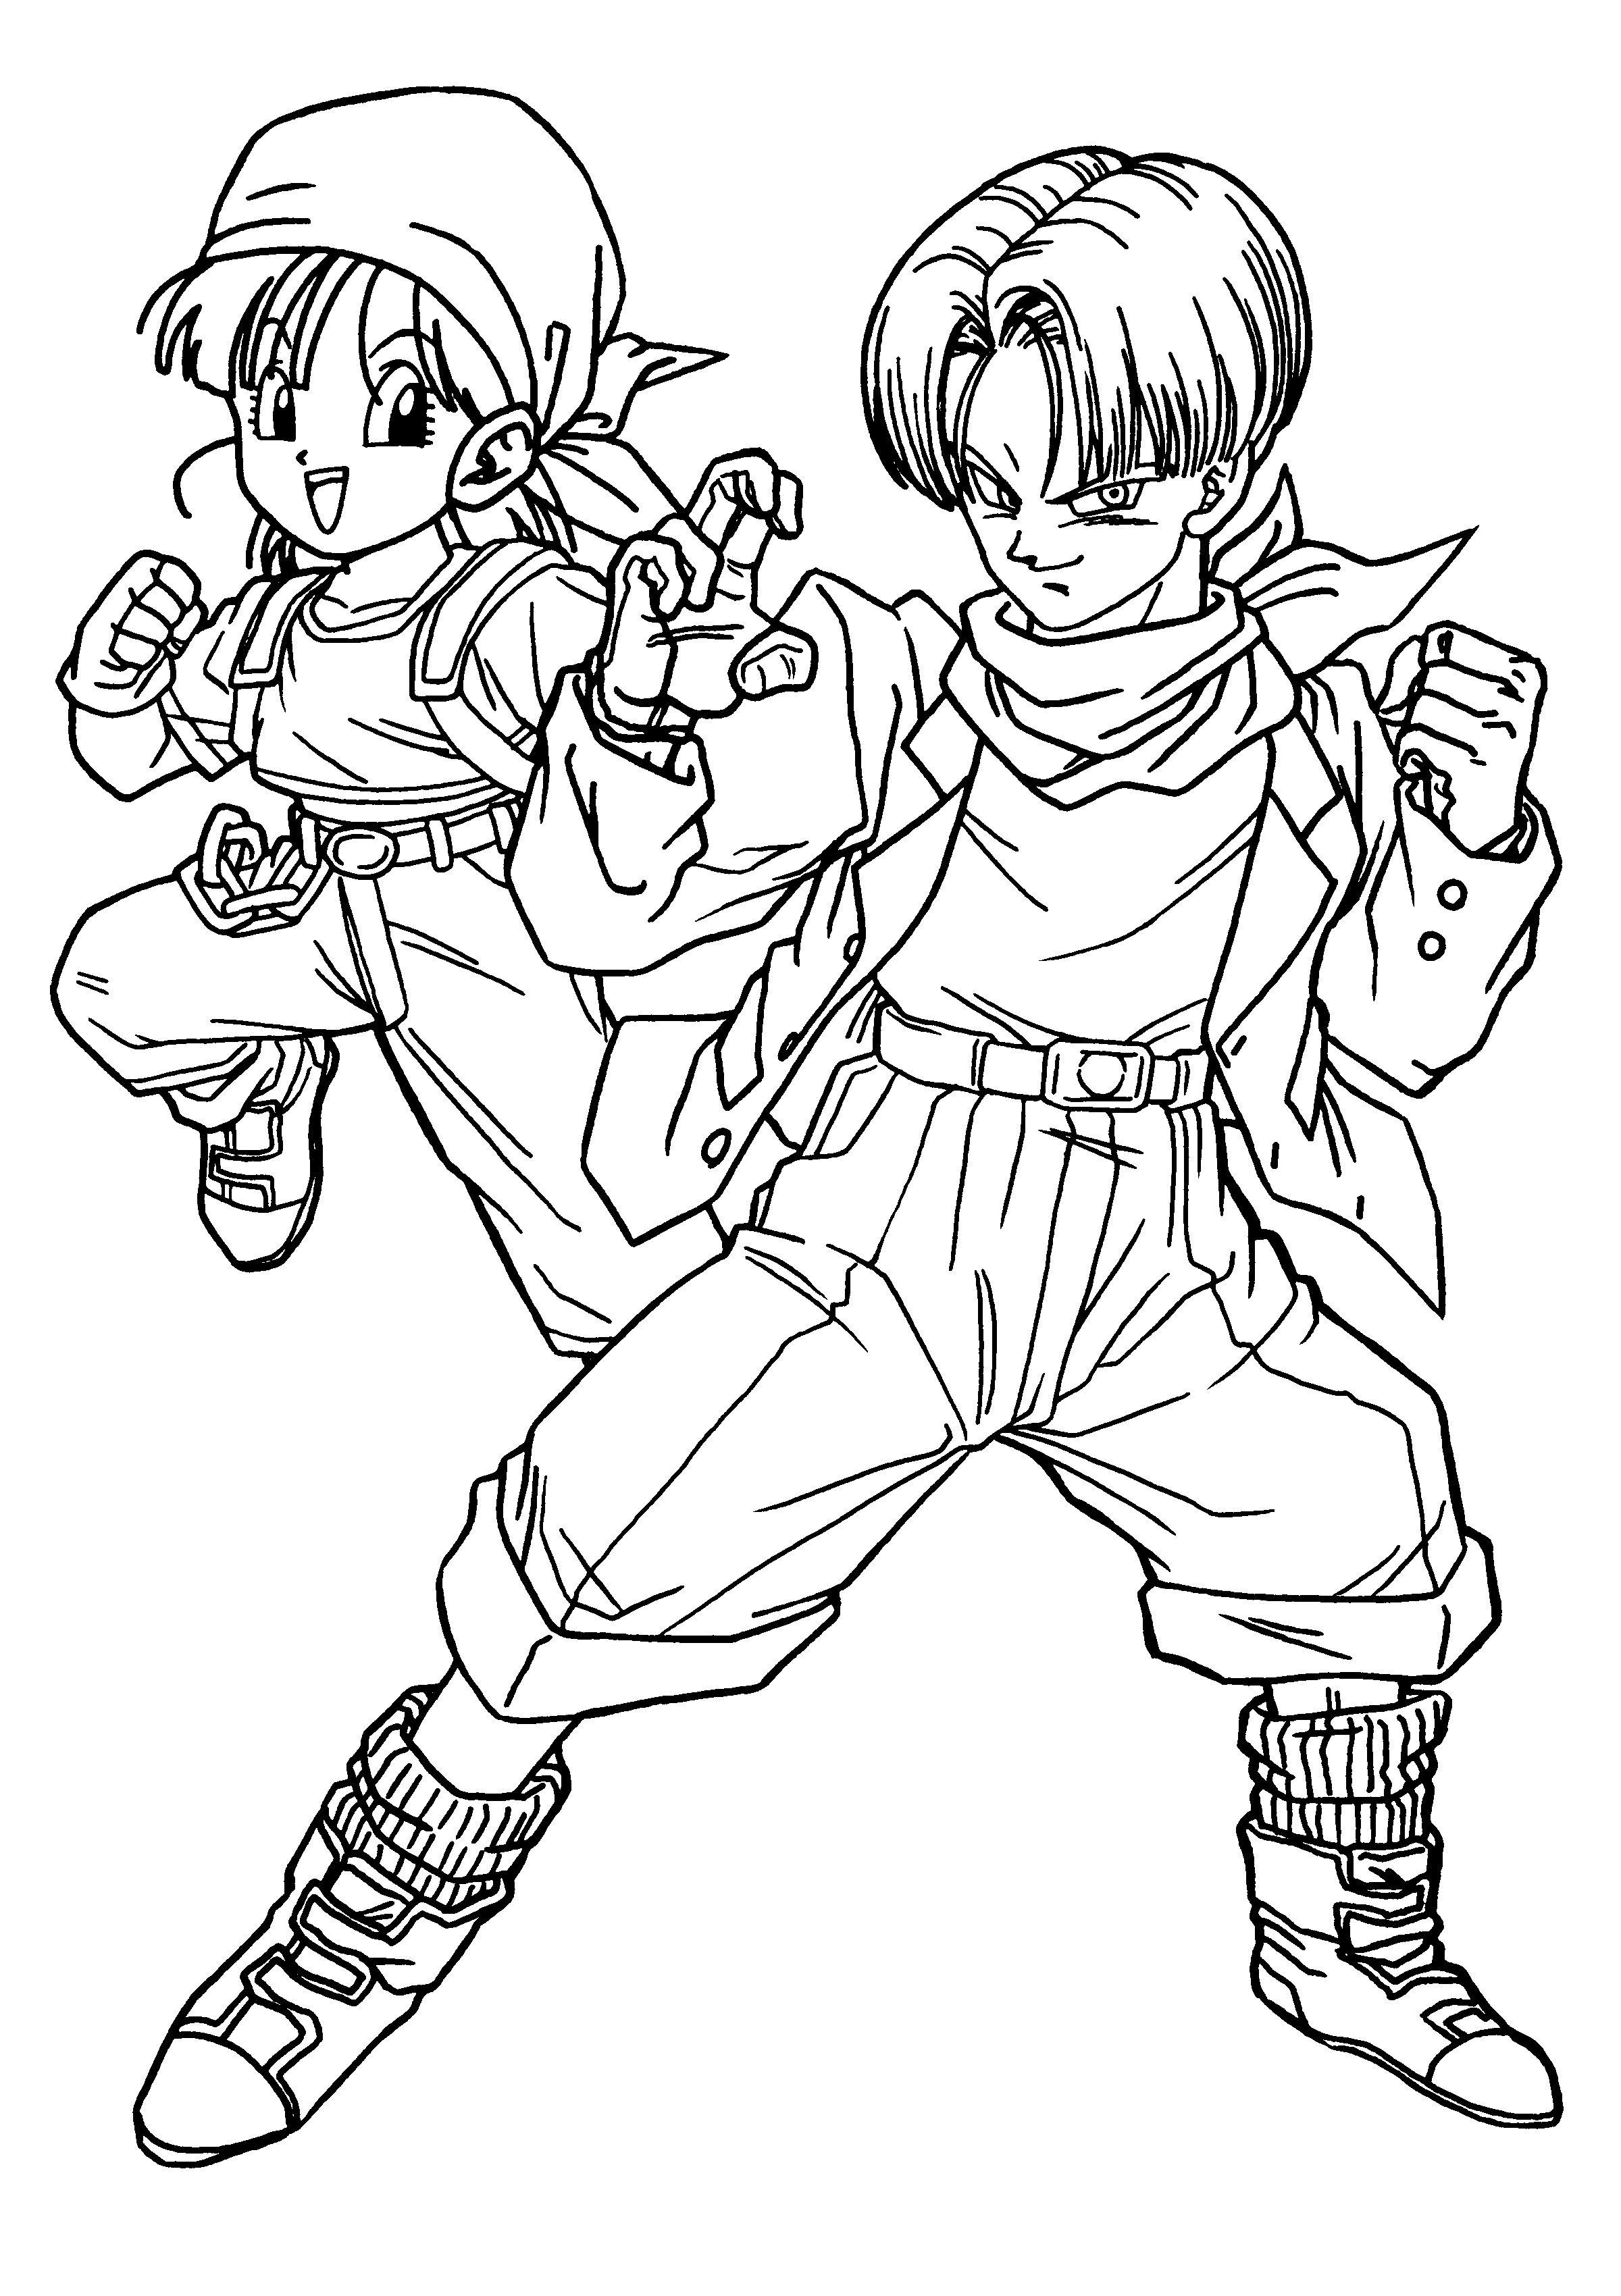 dragonball z coloring book pictures